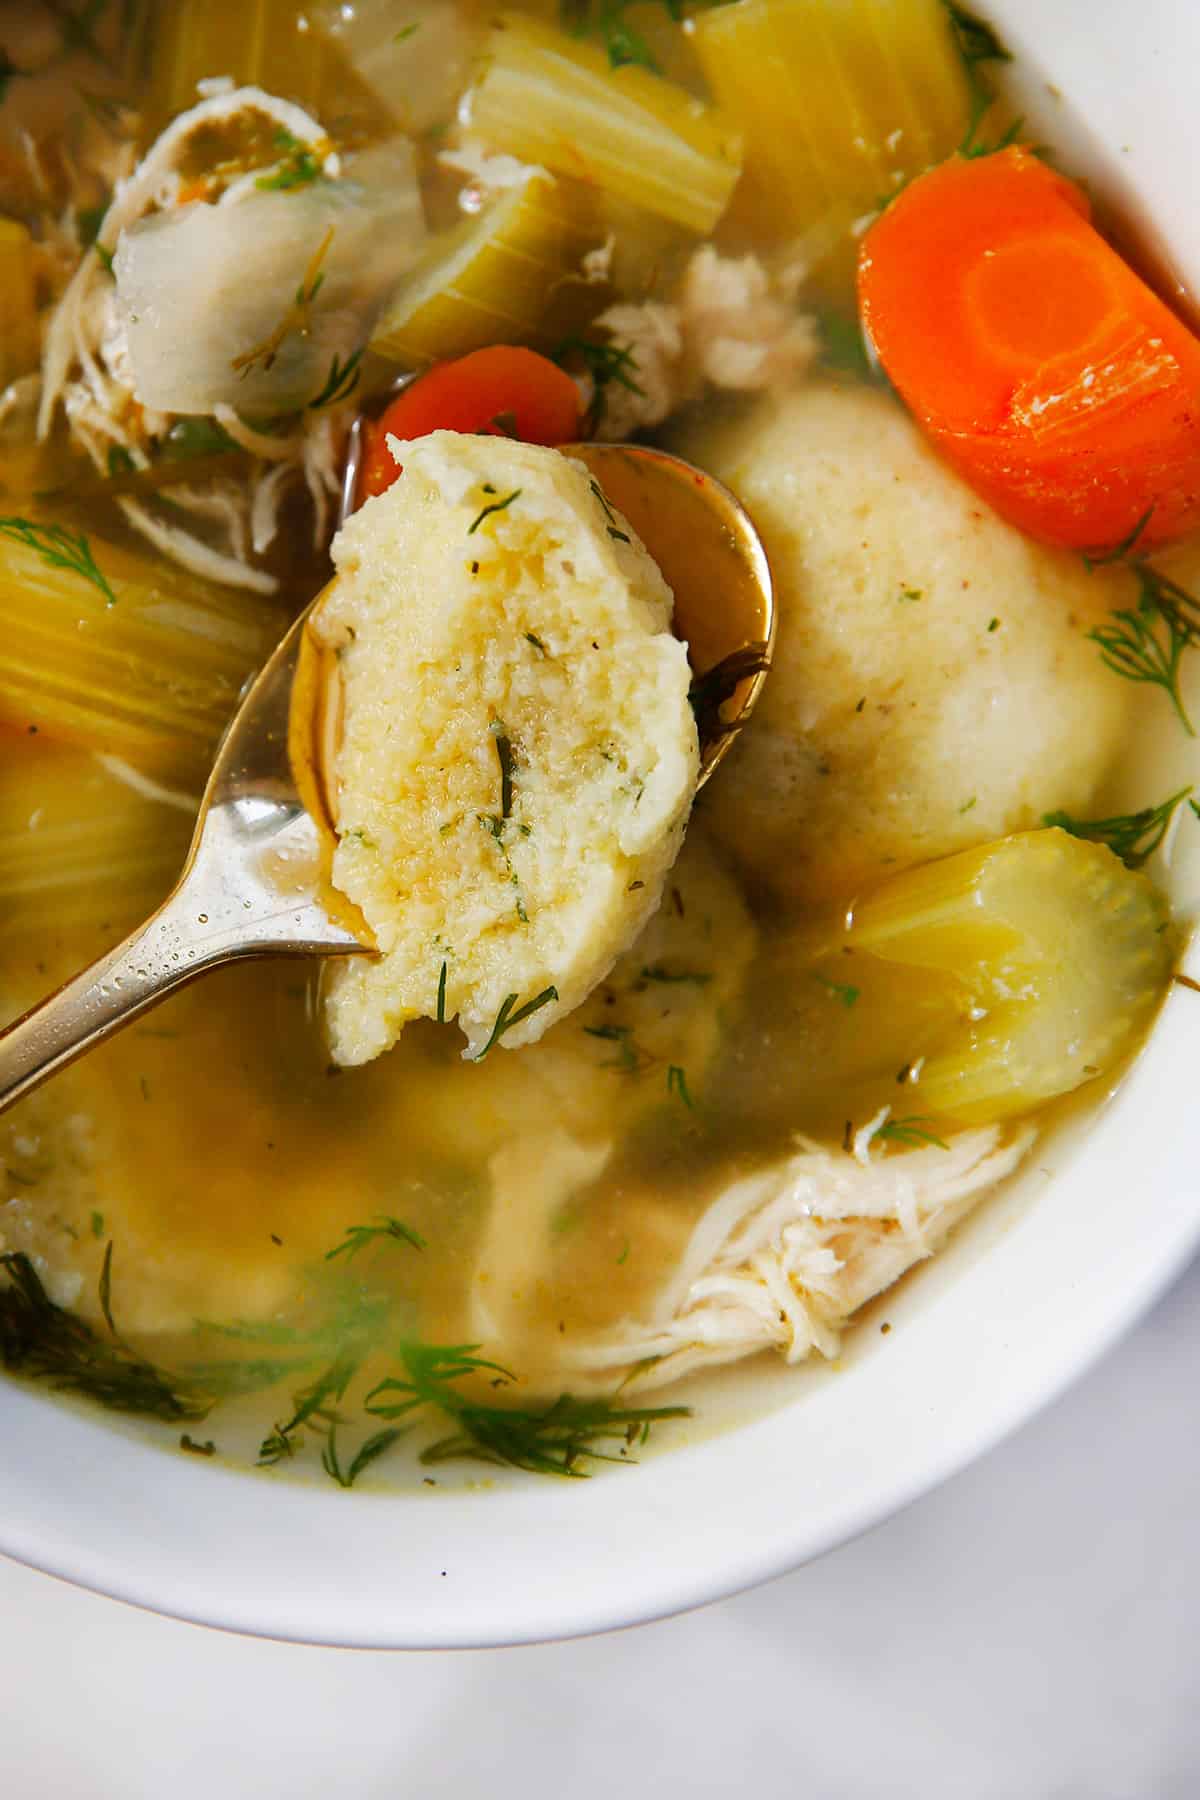 Quick and Easy Gluten Free Matzo Ball Soup - Fearless Dining